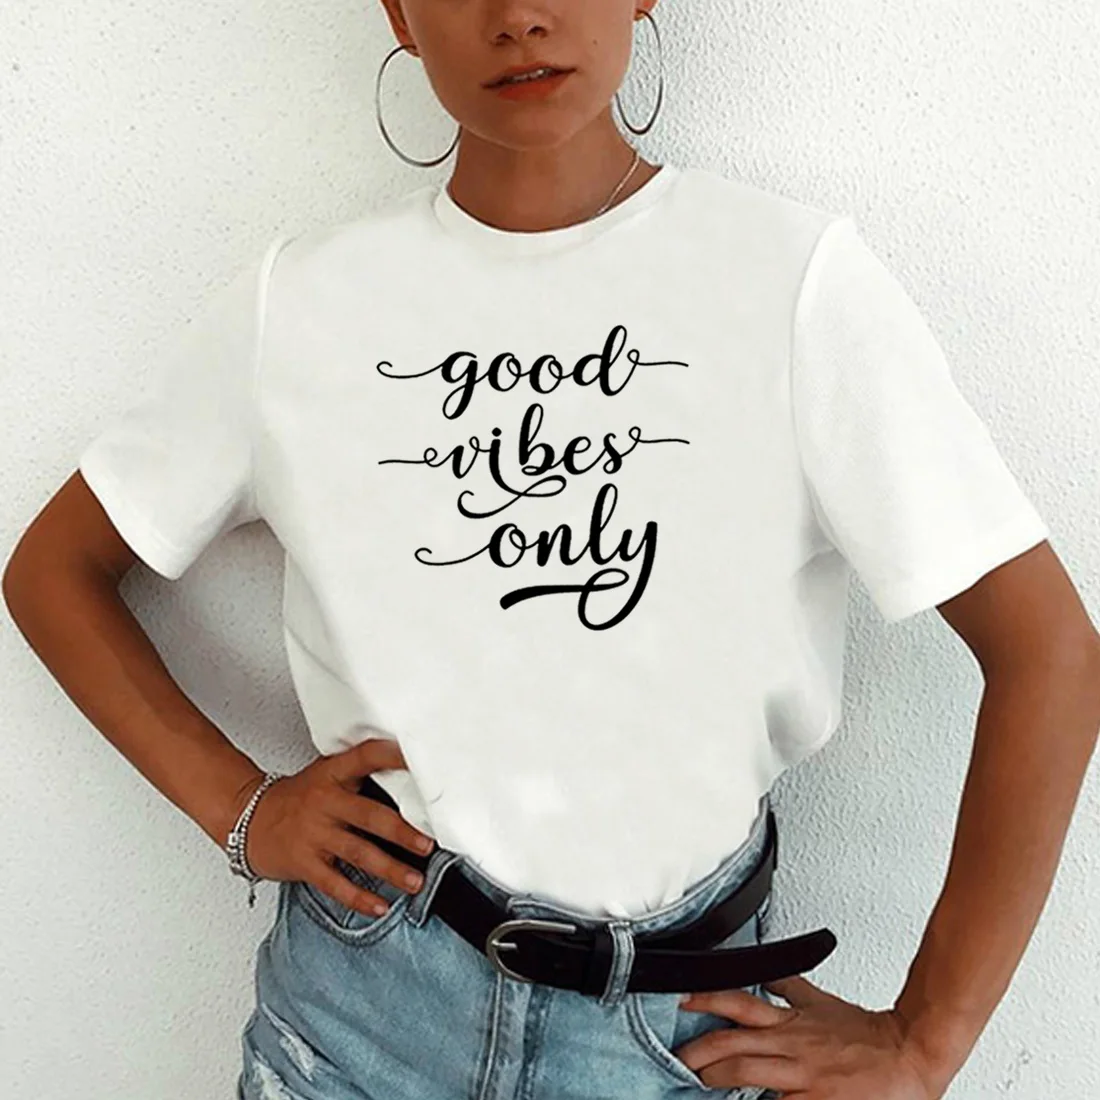 Good Vibes Only Funny T Shirt Women Summer Short Sleeve Cotton Tshirt Women O-neck Camiseta Mujer Casual Tee Shirt Femme Top